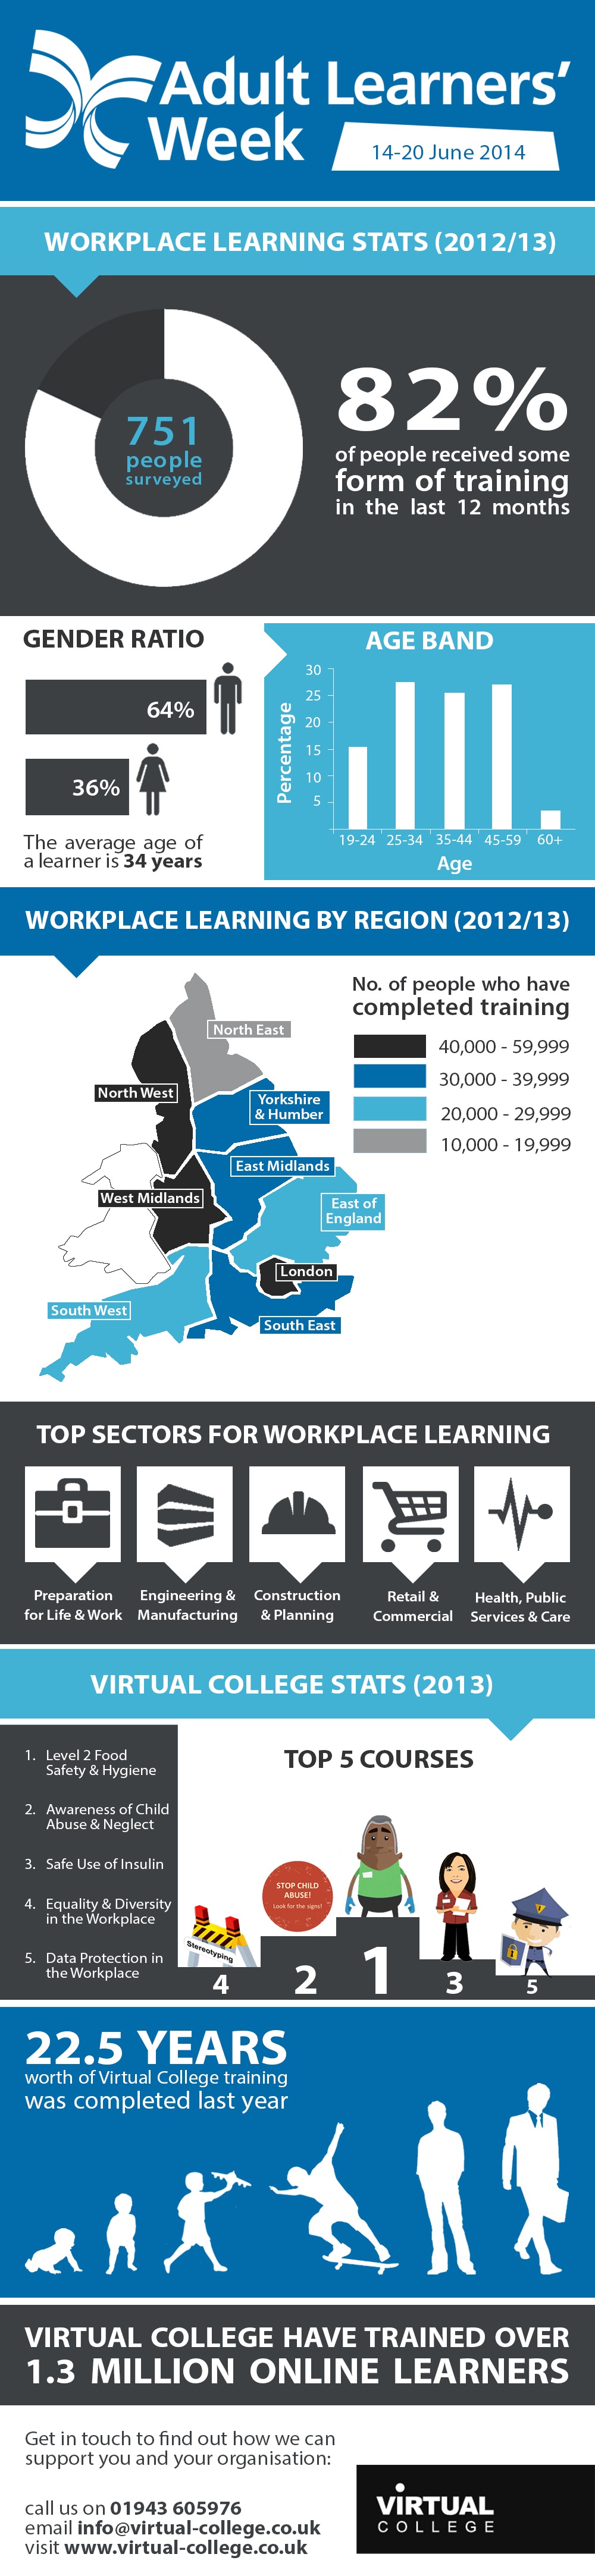 Online Learners Workplace Learning Statistics Infographic